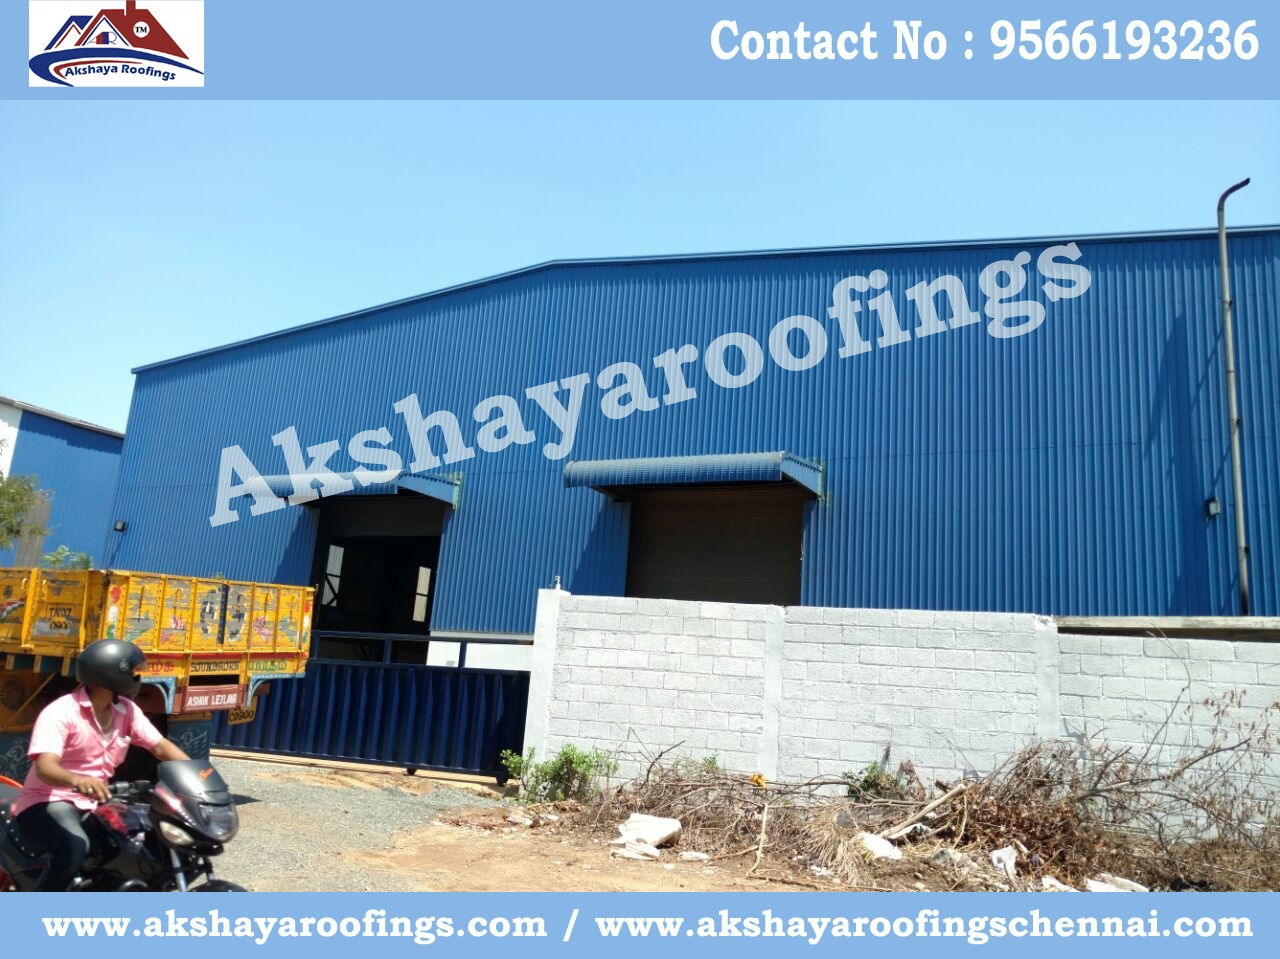 Godown Roofing Shed Contractors Chennai